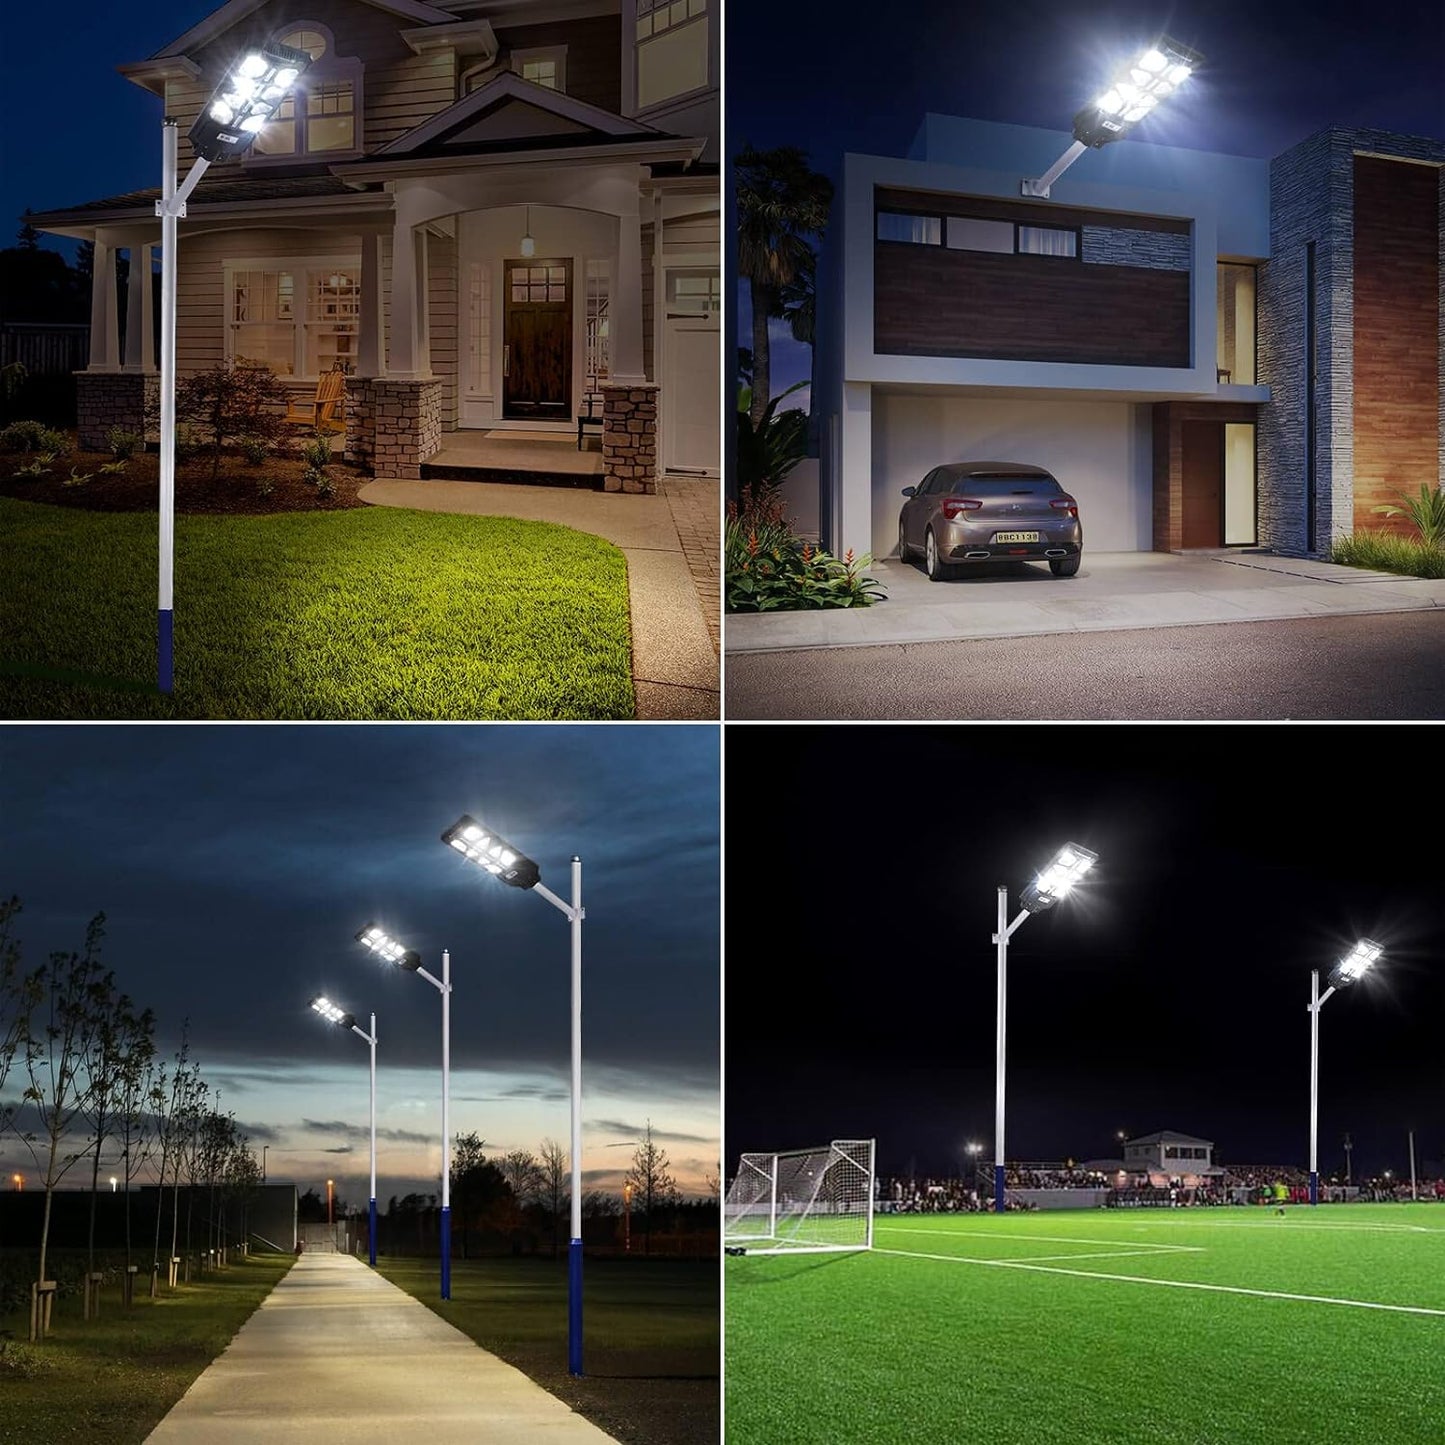 Aihanfir 600W Led Solar Street Light Outdoor Waterproof, with Motion Sensor and Remote Control for Parking Lot Lights Commercial, Yard, Road-15W Solar Charging Panel, 20000mAh, 6500K Double-Chi